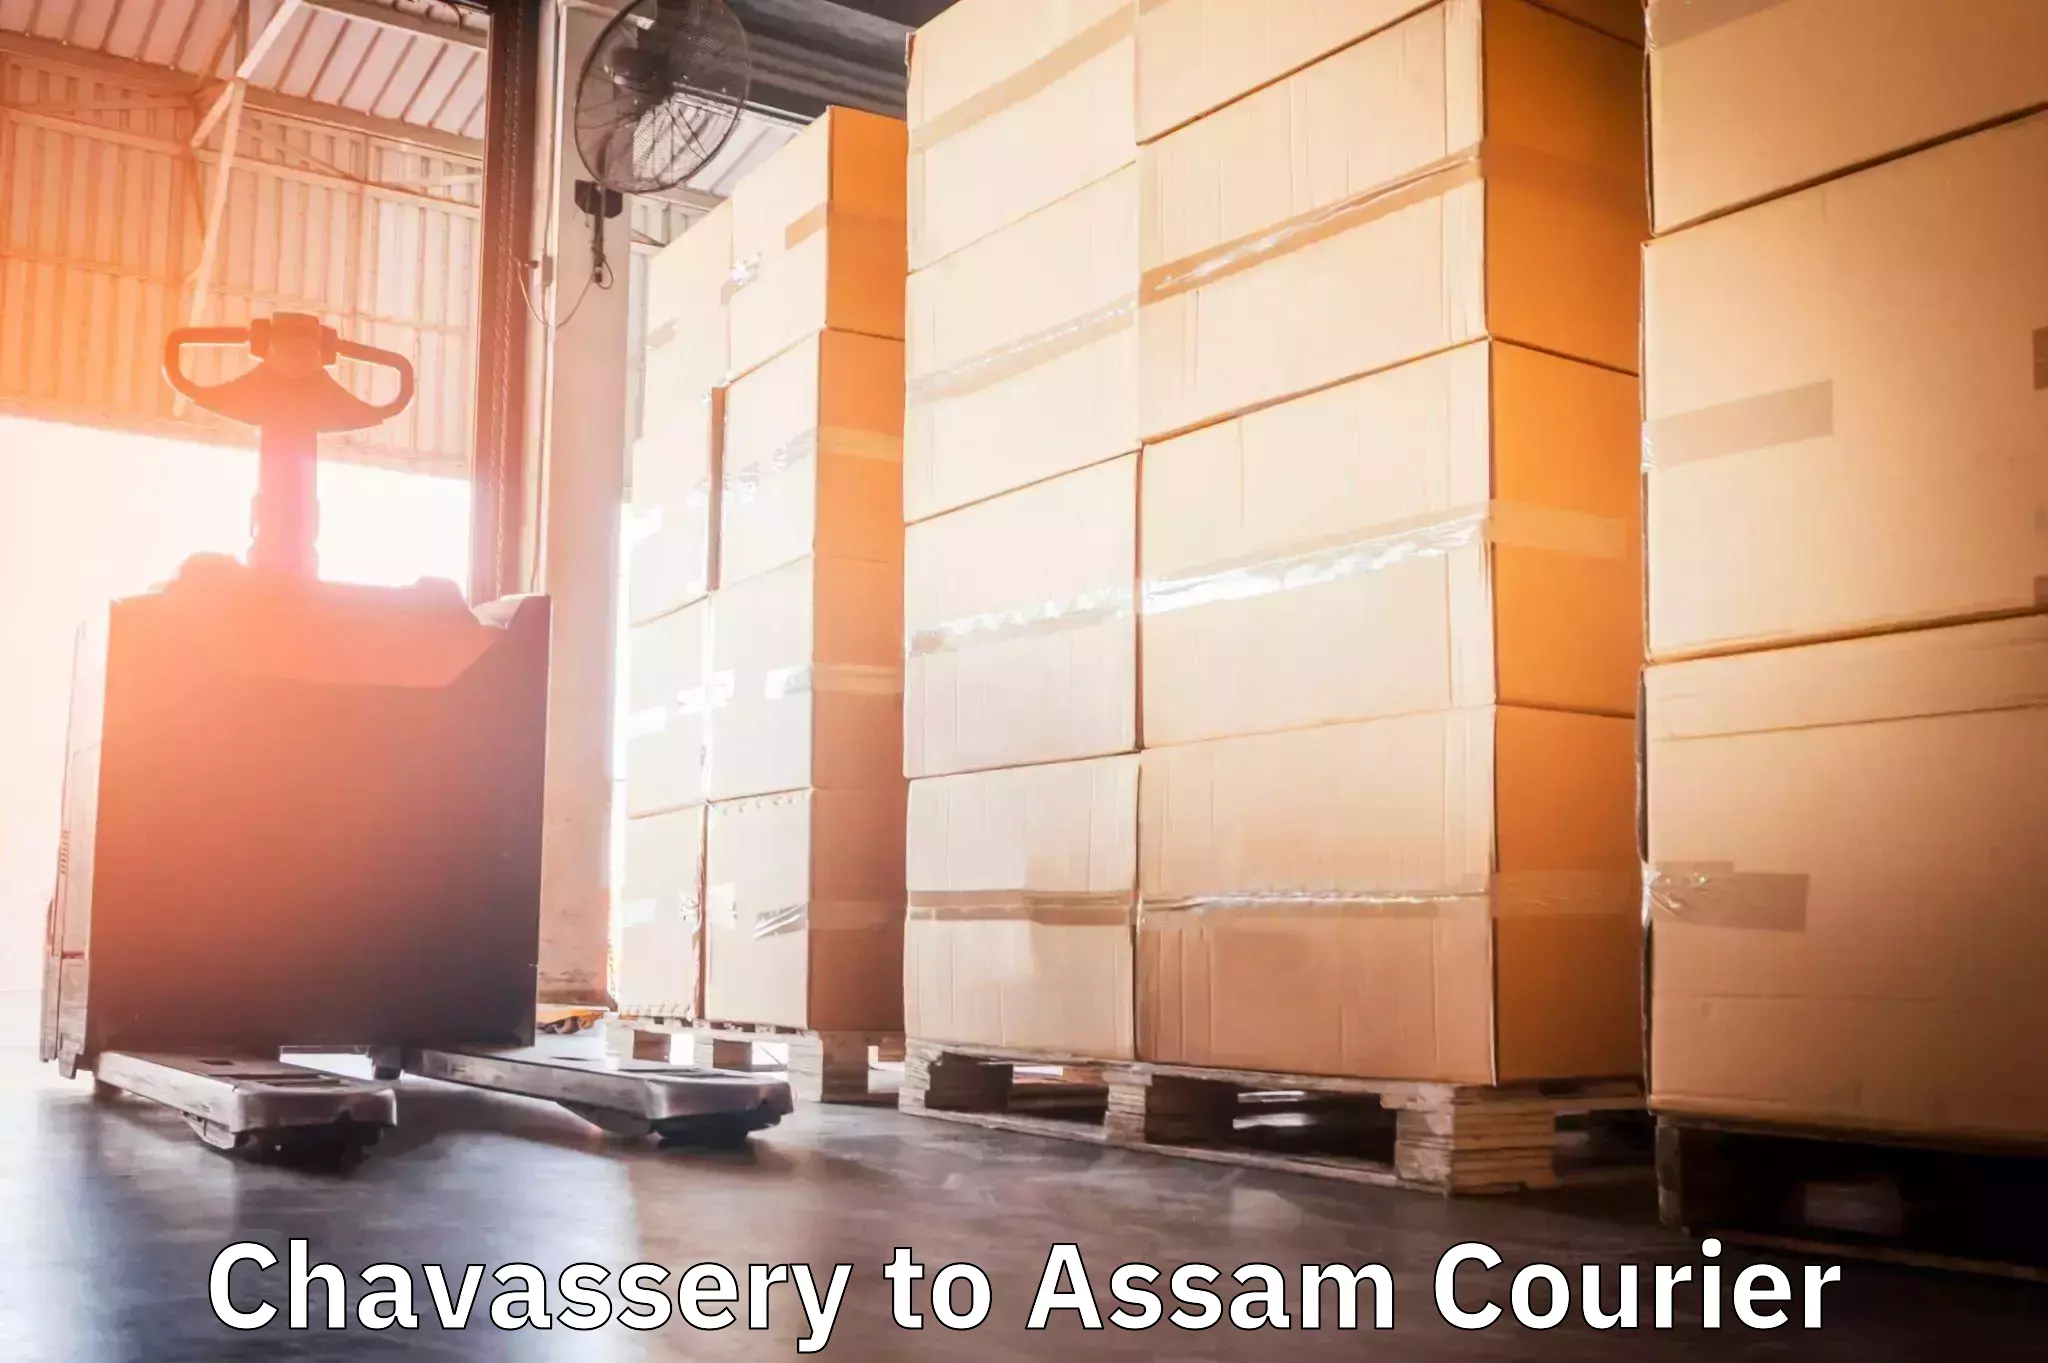 Doorstep delivery service Chavassery to Lala Assam